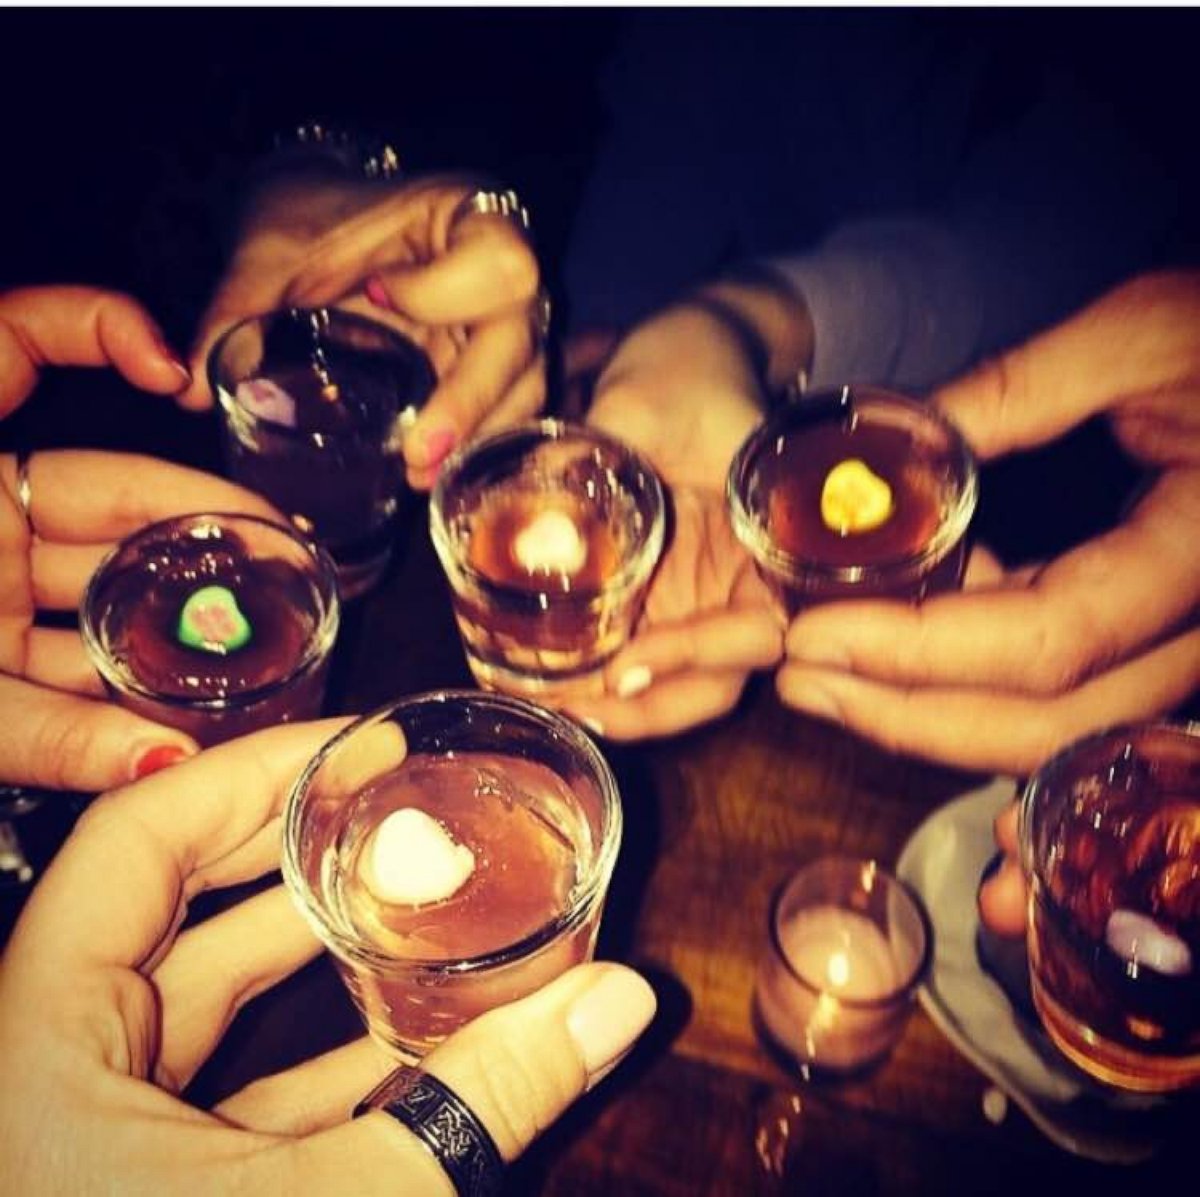 PHOTO: Restaurants offer drink specials for singles parties, such as these jello shots with candy hearts from The Meatball Shop in New York City.